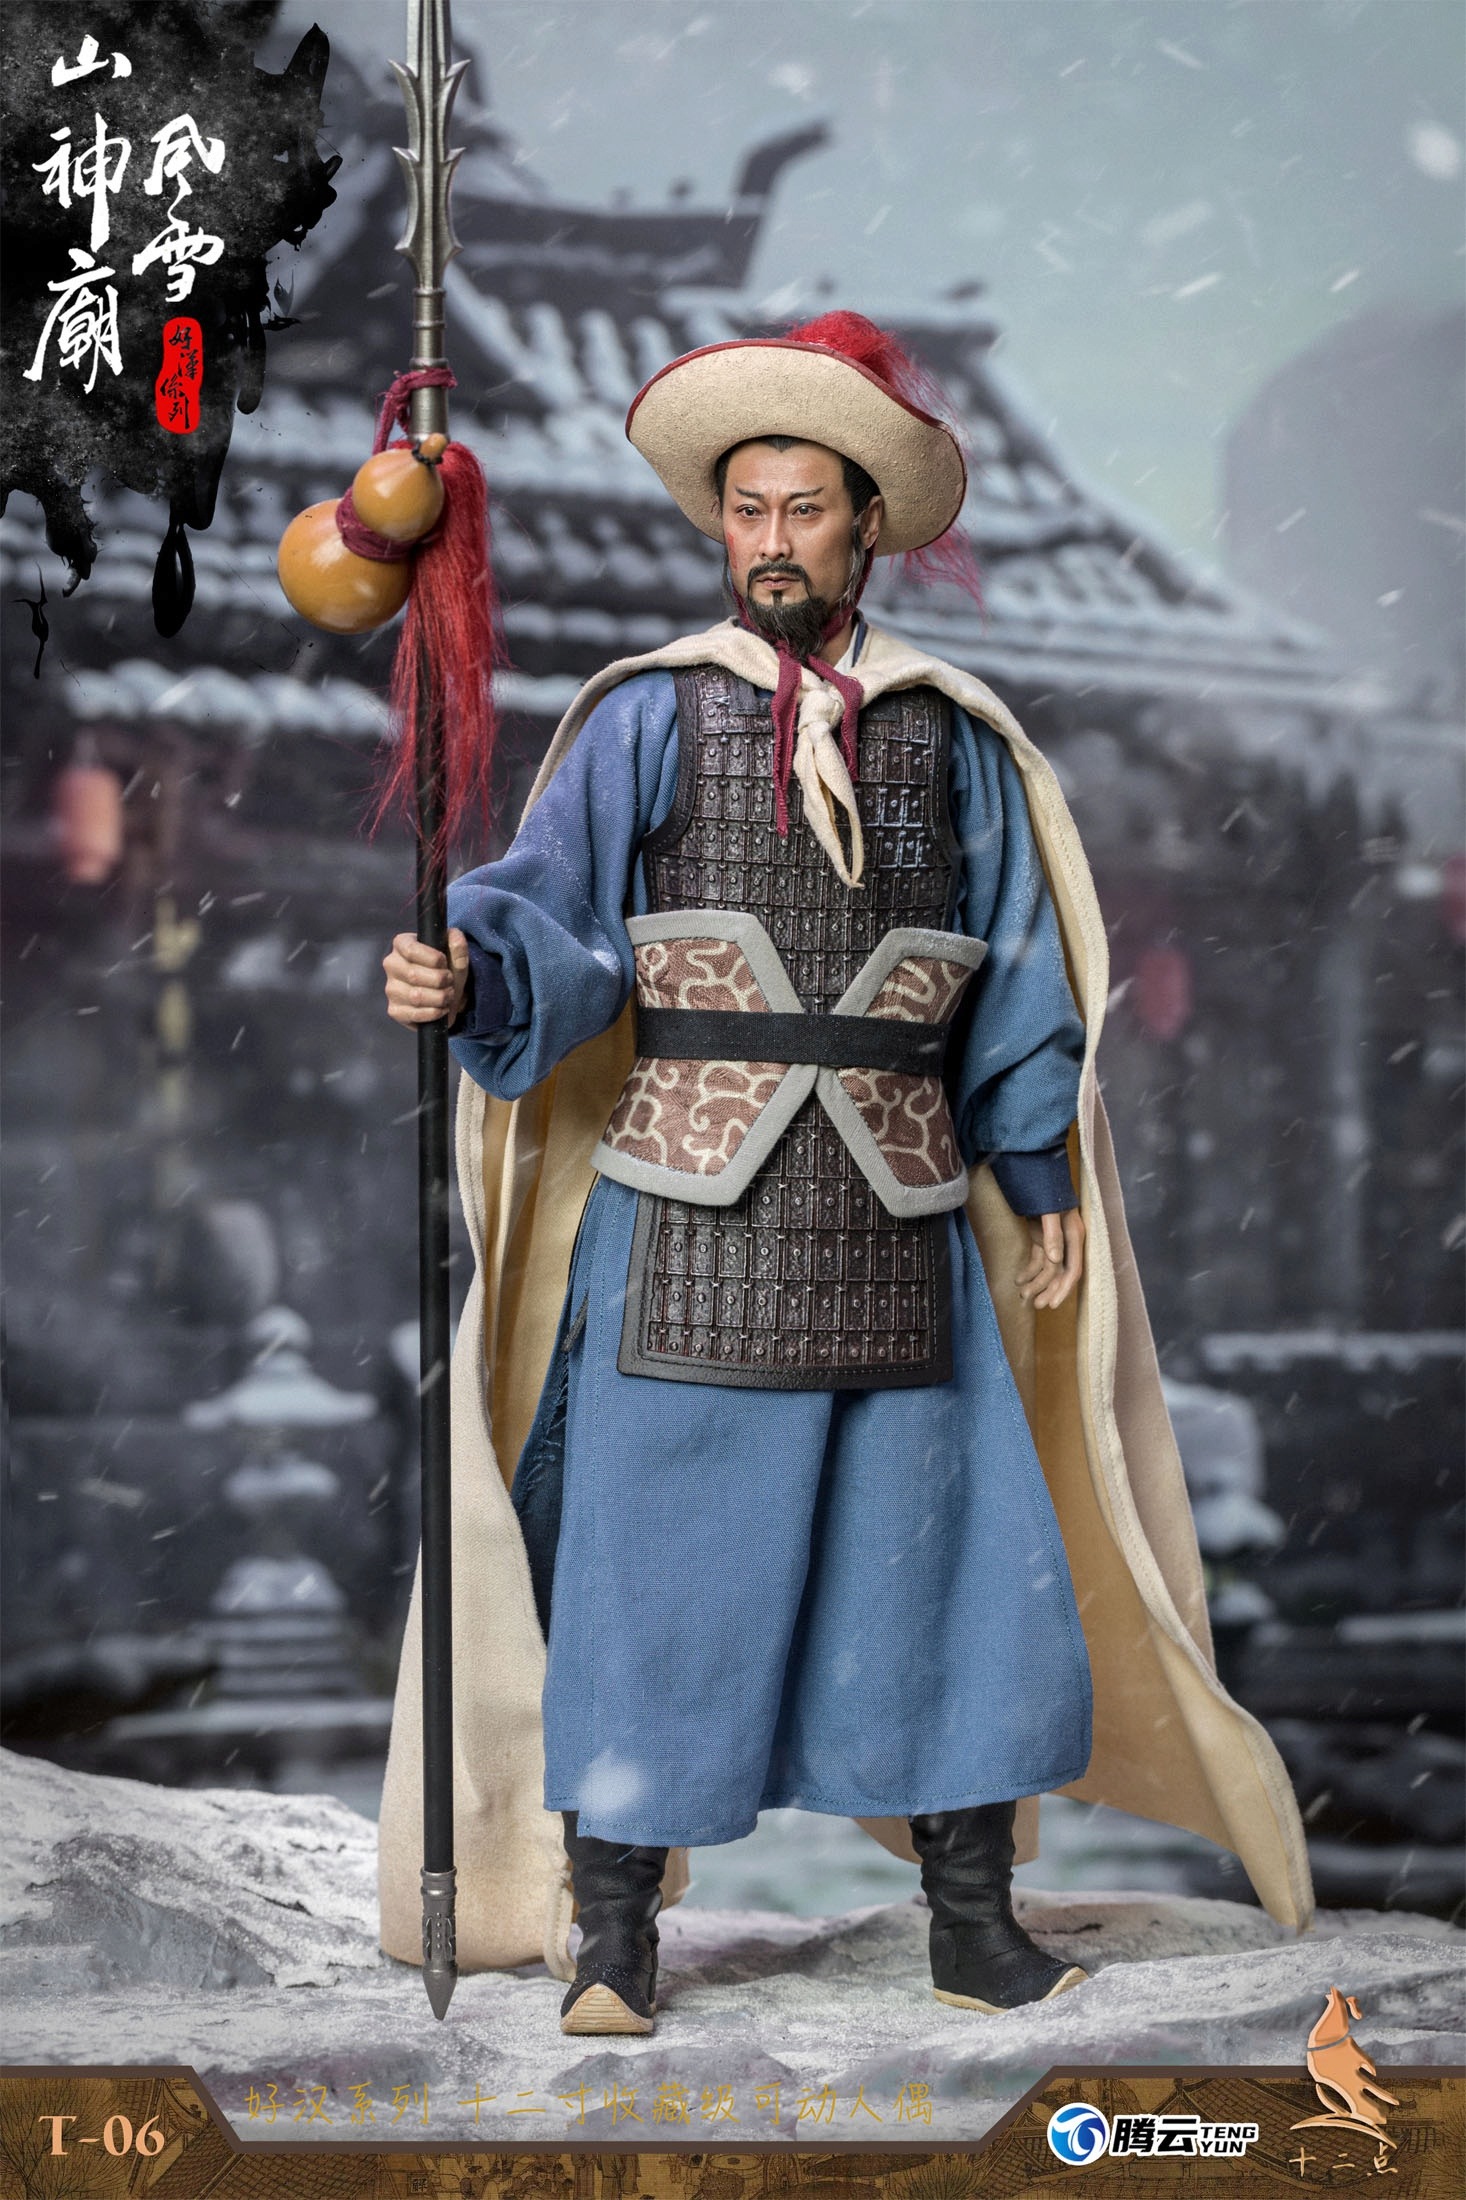 NEW PRODUCT: Twelve - Hero Series - Leopard Head Lin Chong Fengxue Mountain Temple Action Figure (T-05 /T-06) 3124